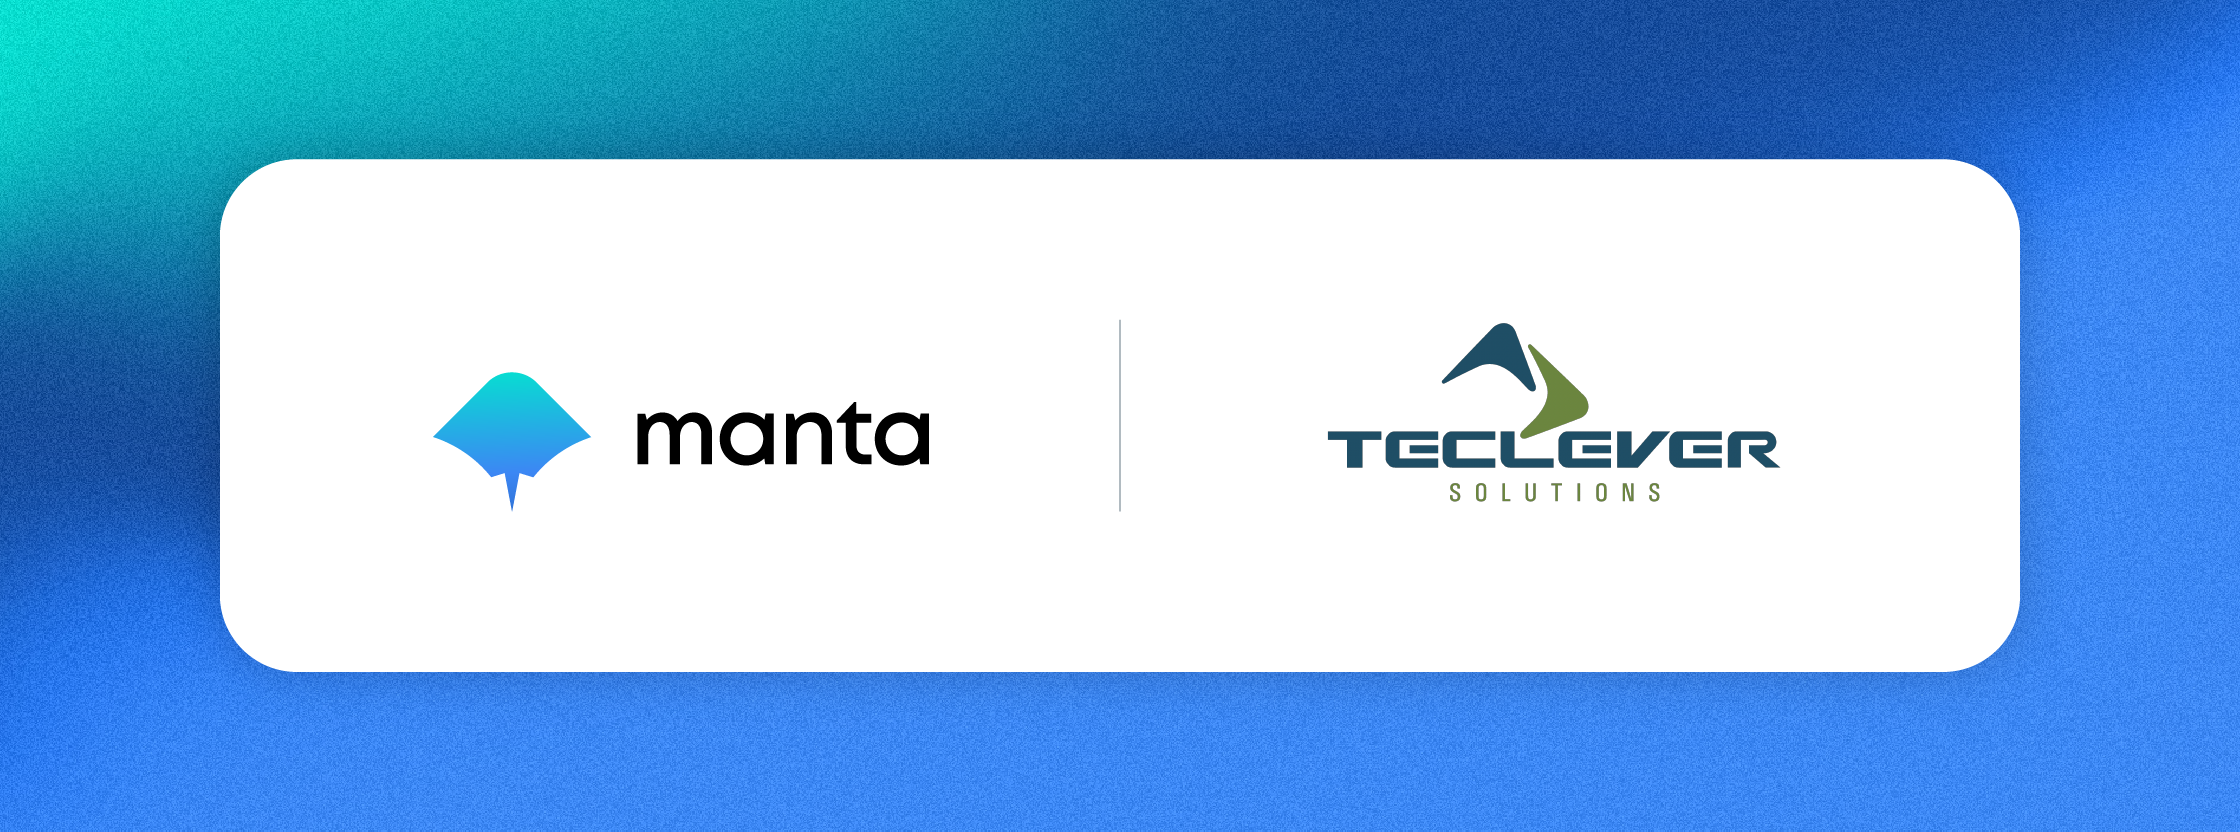 Manta to Expand Global Footprint Through Partnership with Teclever Solutions Featured Image